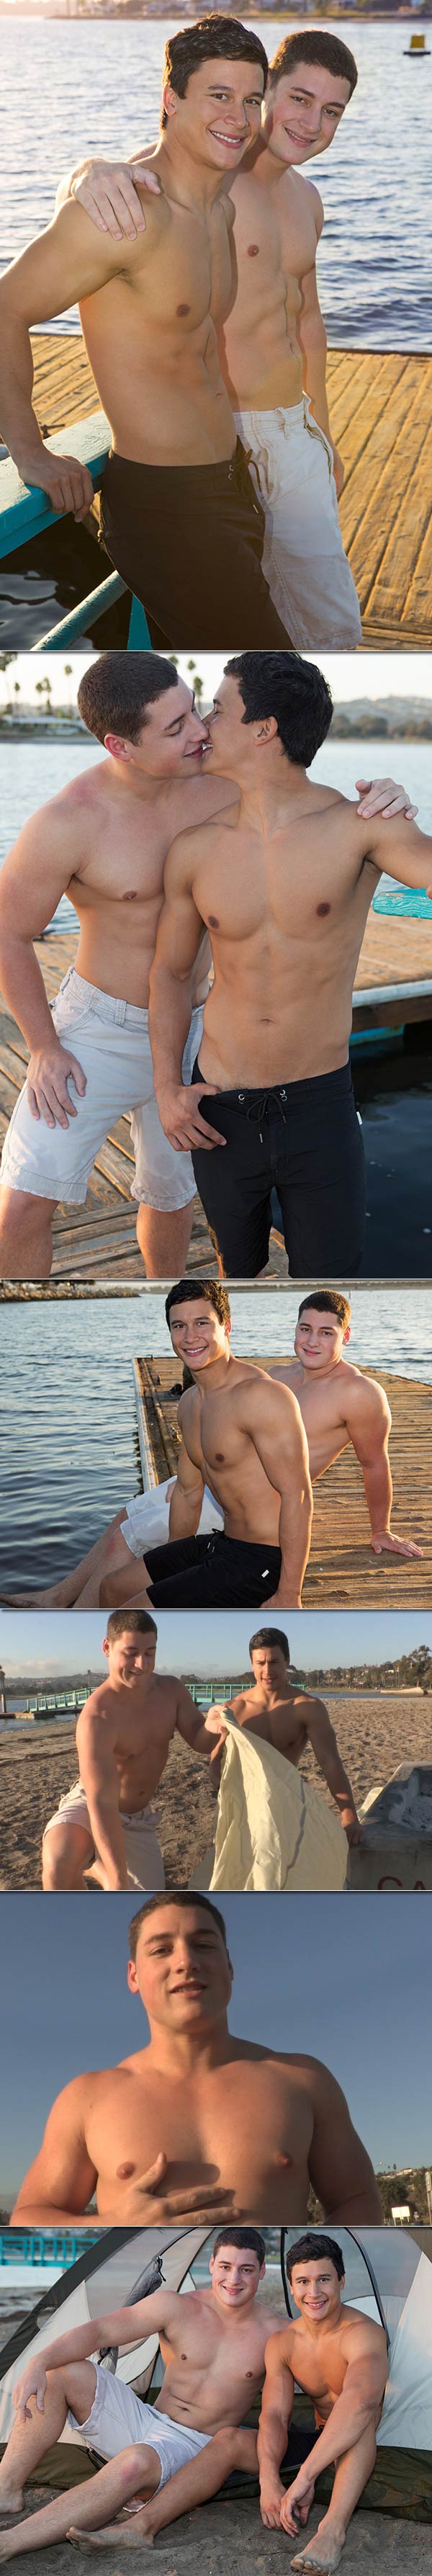 Forrest & Perry (Bareback Flip-Flop) at SeanCody